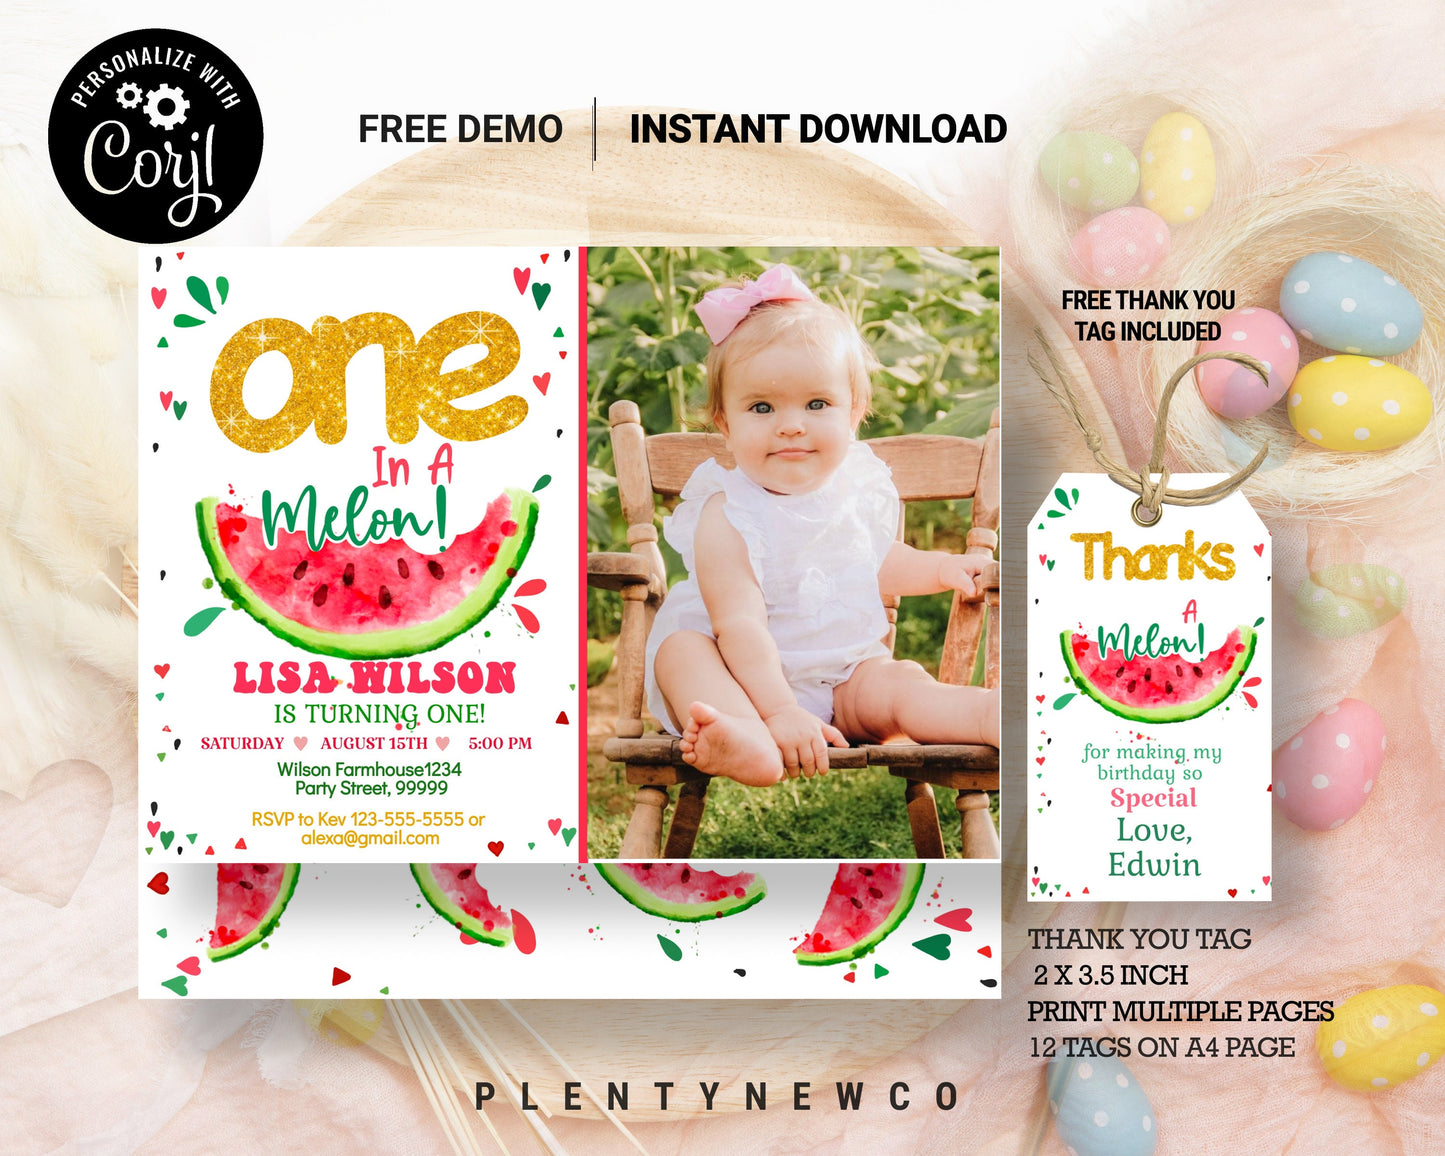 Watermelon Invitation EDITABLE, One in a Melon Birthday Invitations, Pink Watermelon Party 1st Birthday Printable Summer Instant Download WM